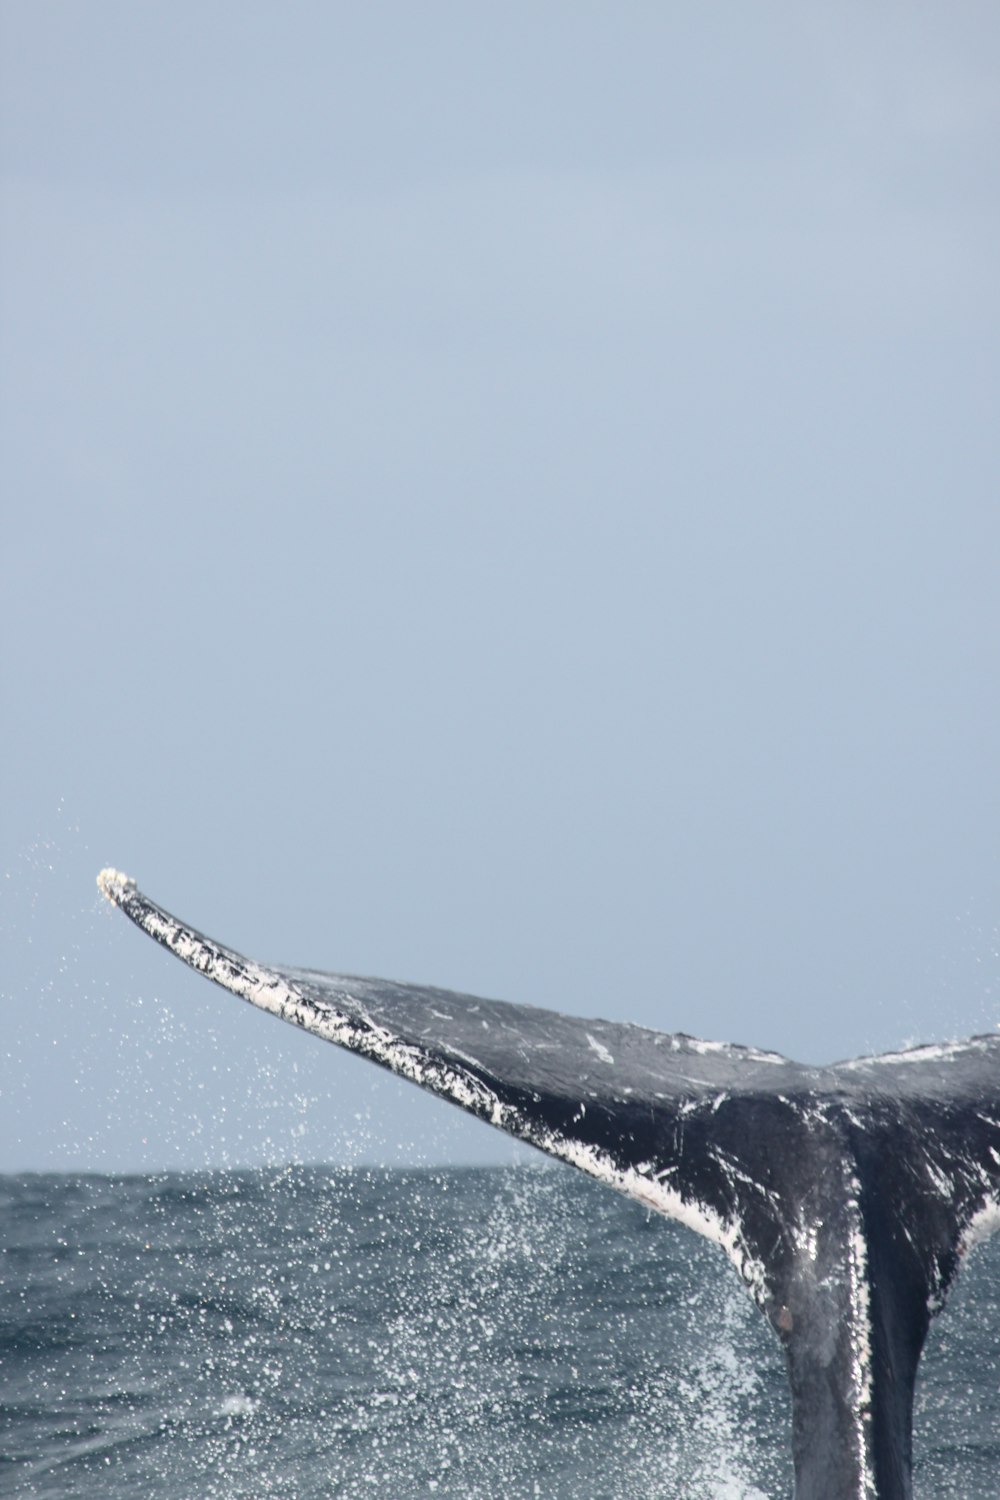 black and white whale on blue sea under blue sky during daytime